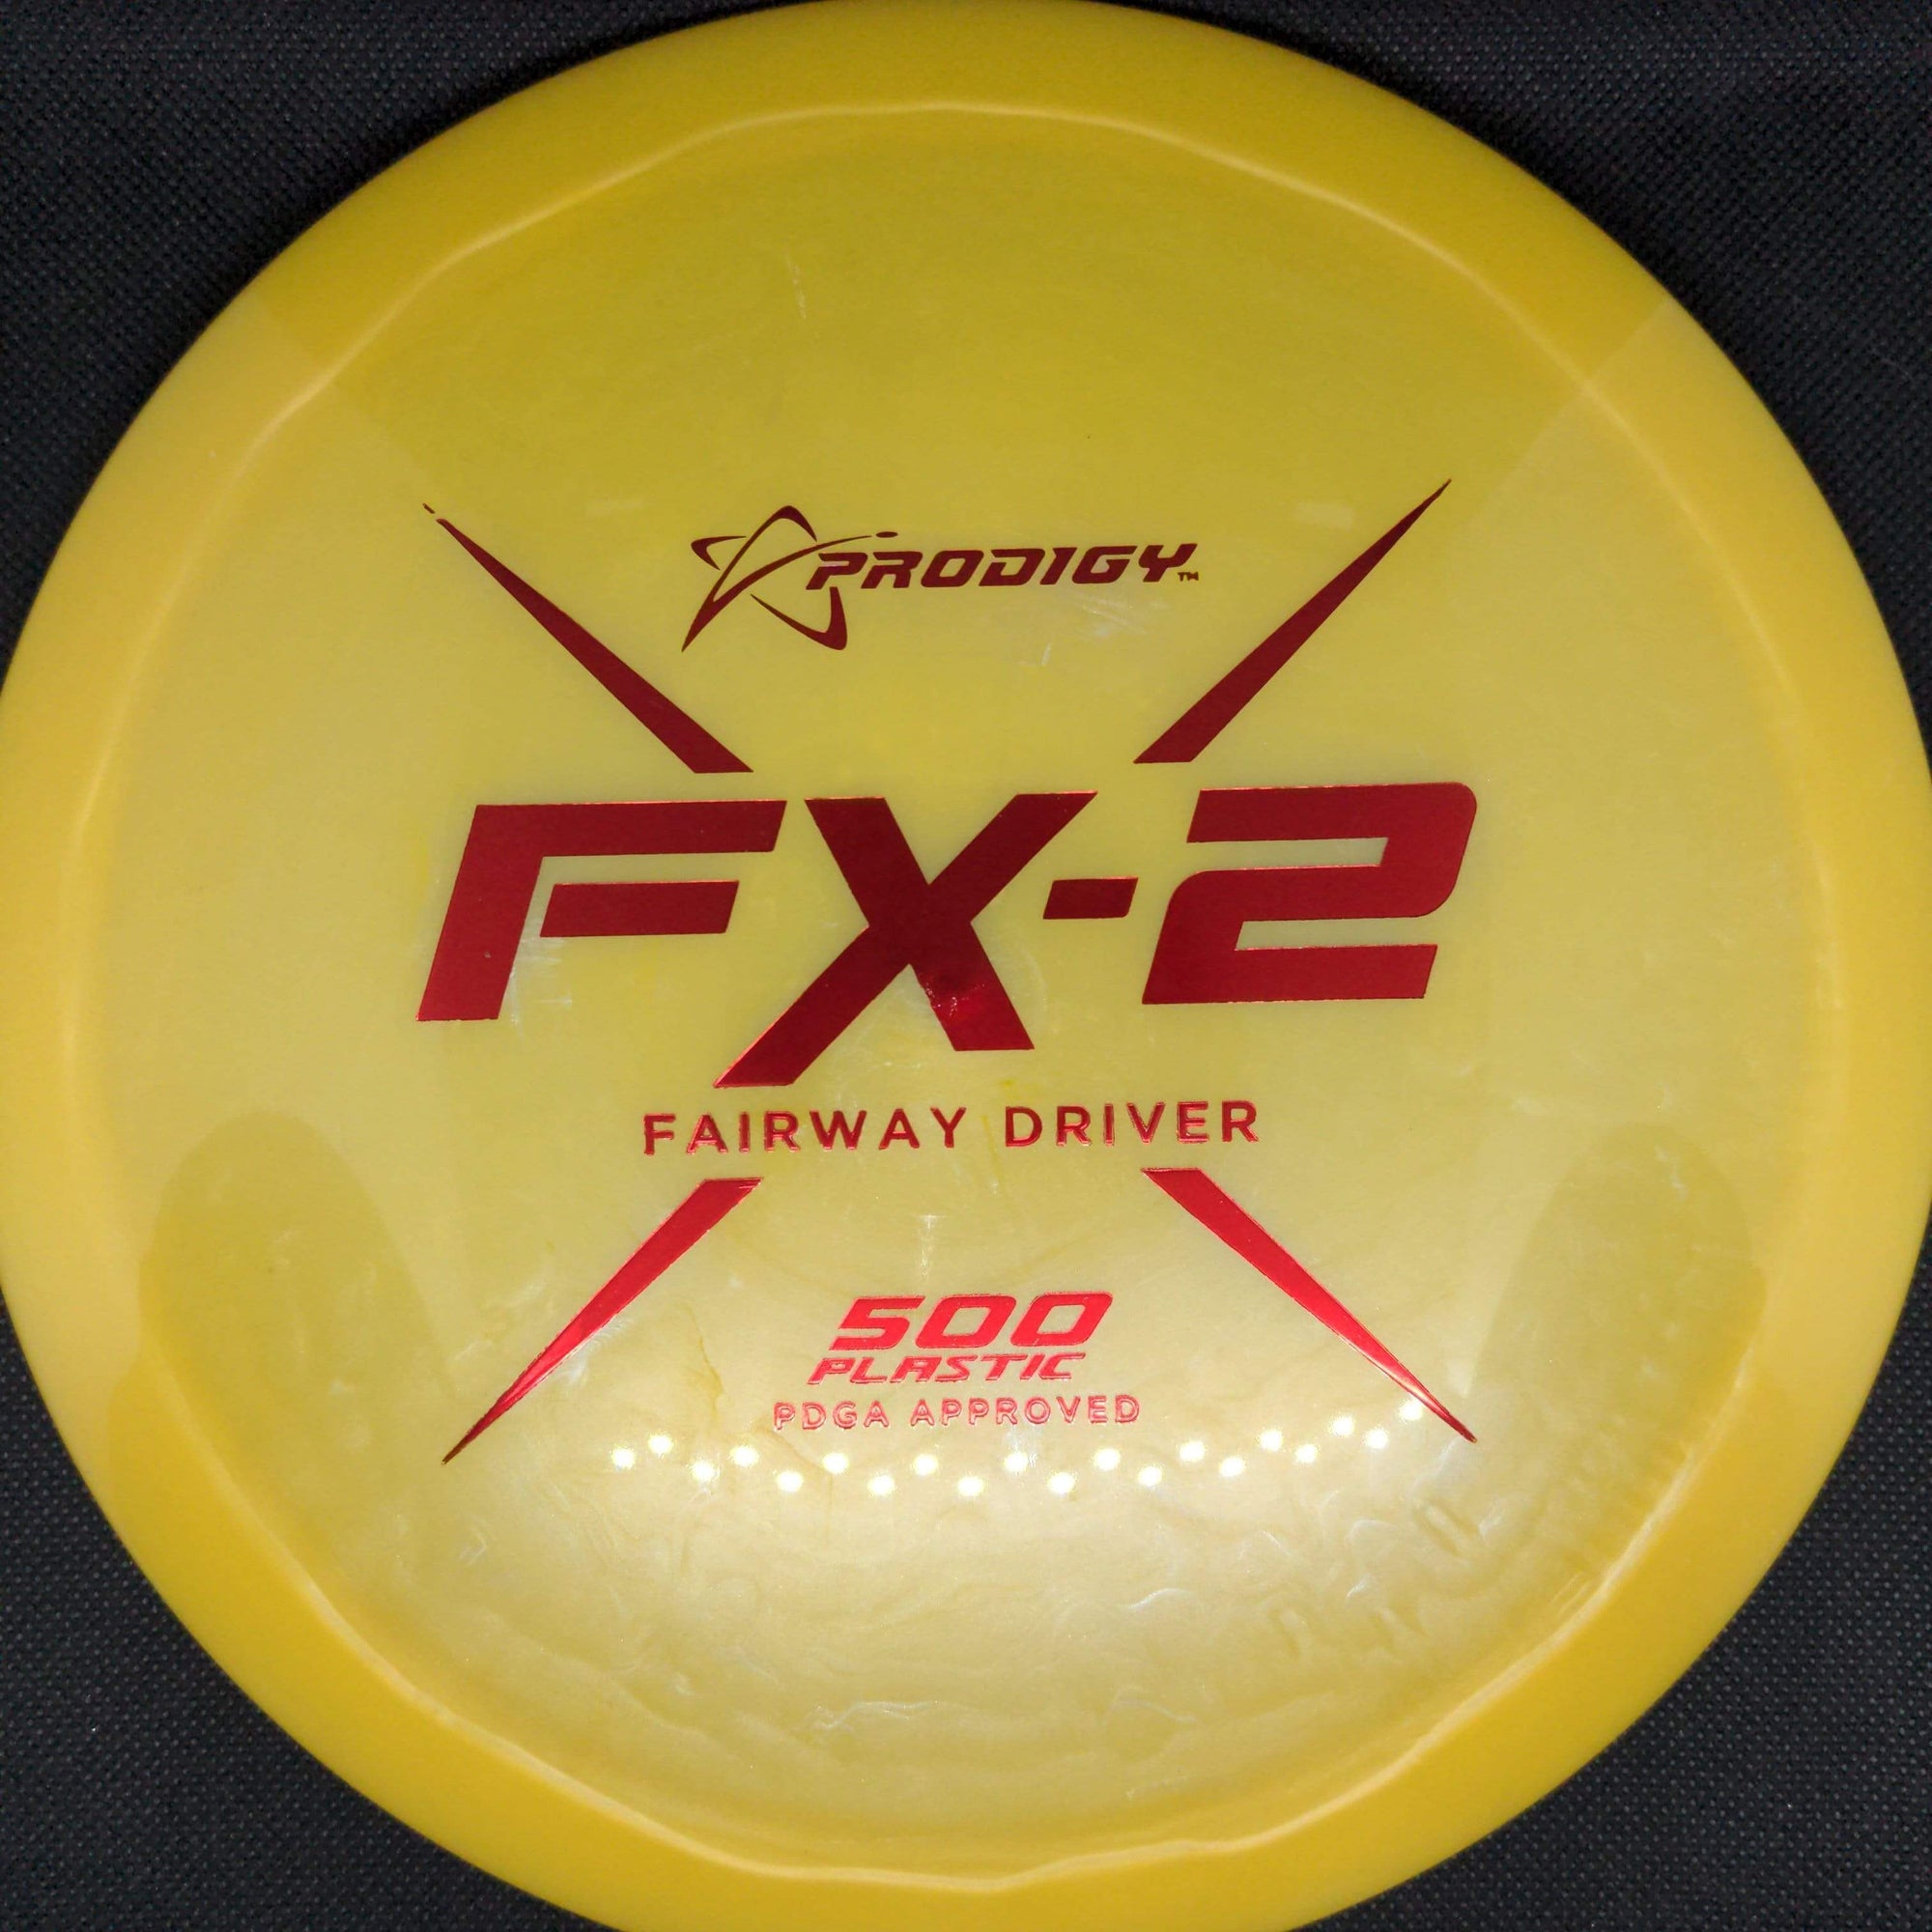 Prodigy Fairway Driver Yellow Red Stamp 174g FX2 , 500 Plastic